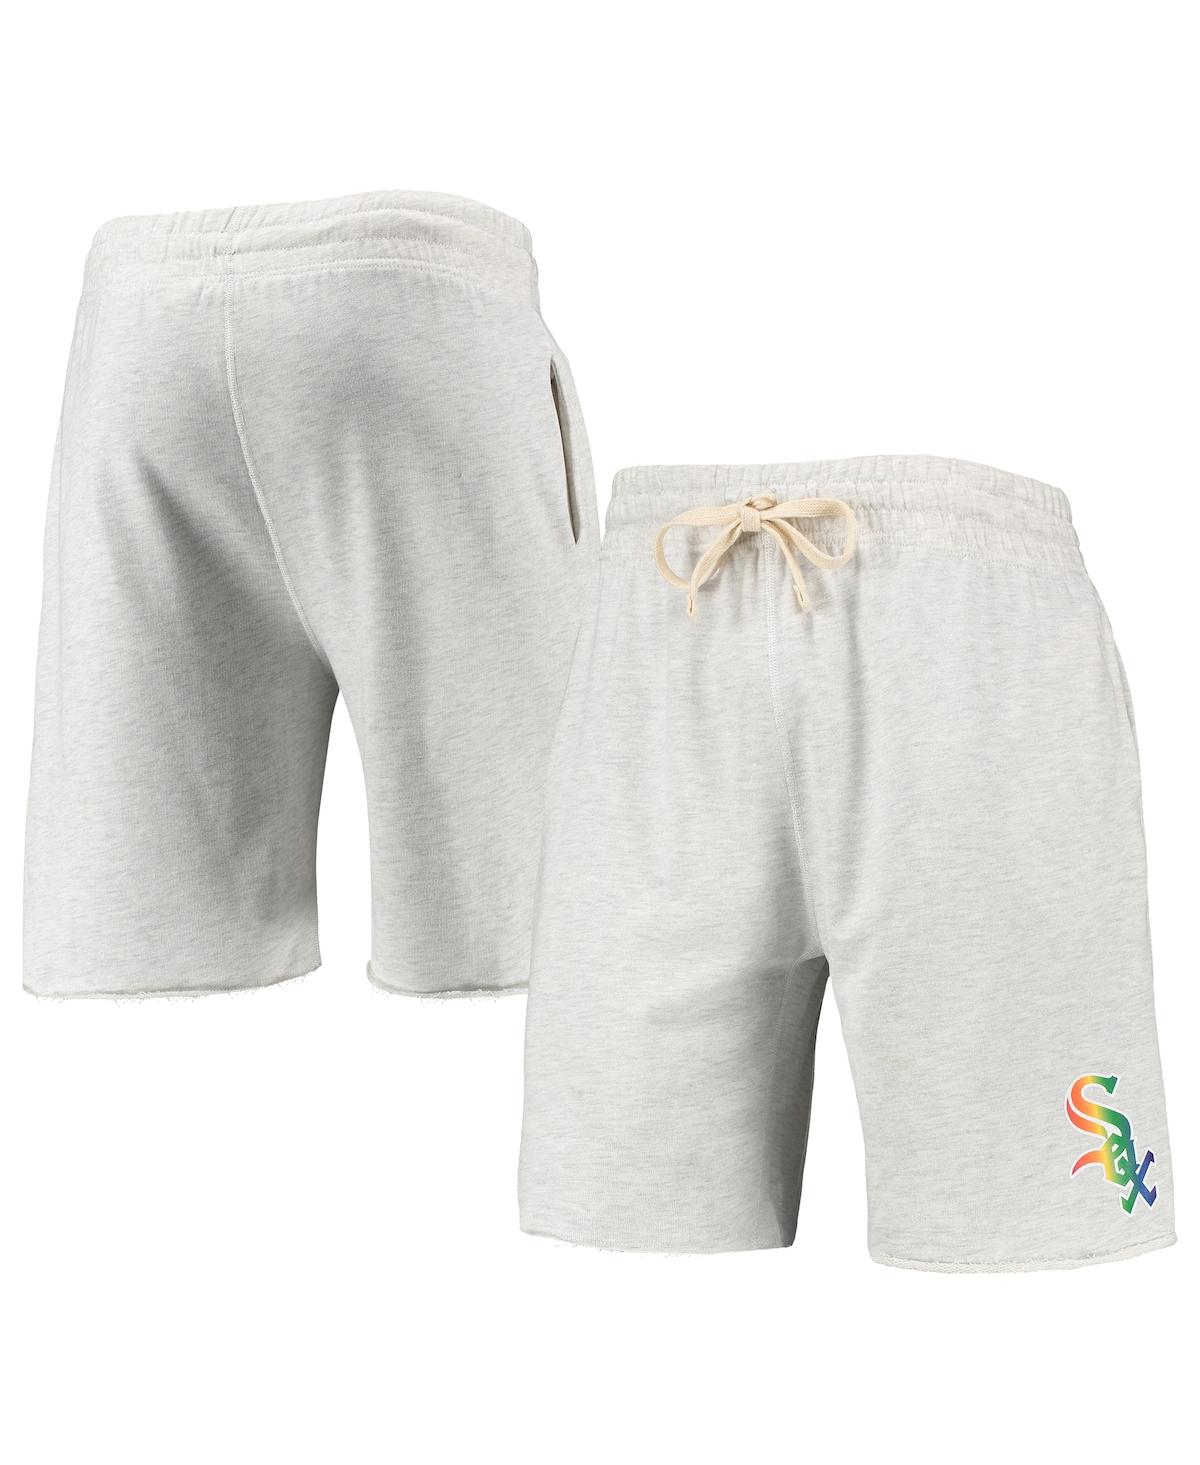 Men's Concepts Sport Oatmeal Chicago White Sox Mainstream Logo Terry Tri-Blend Shorts - Oatmeal